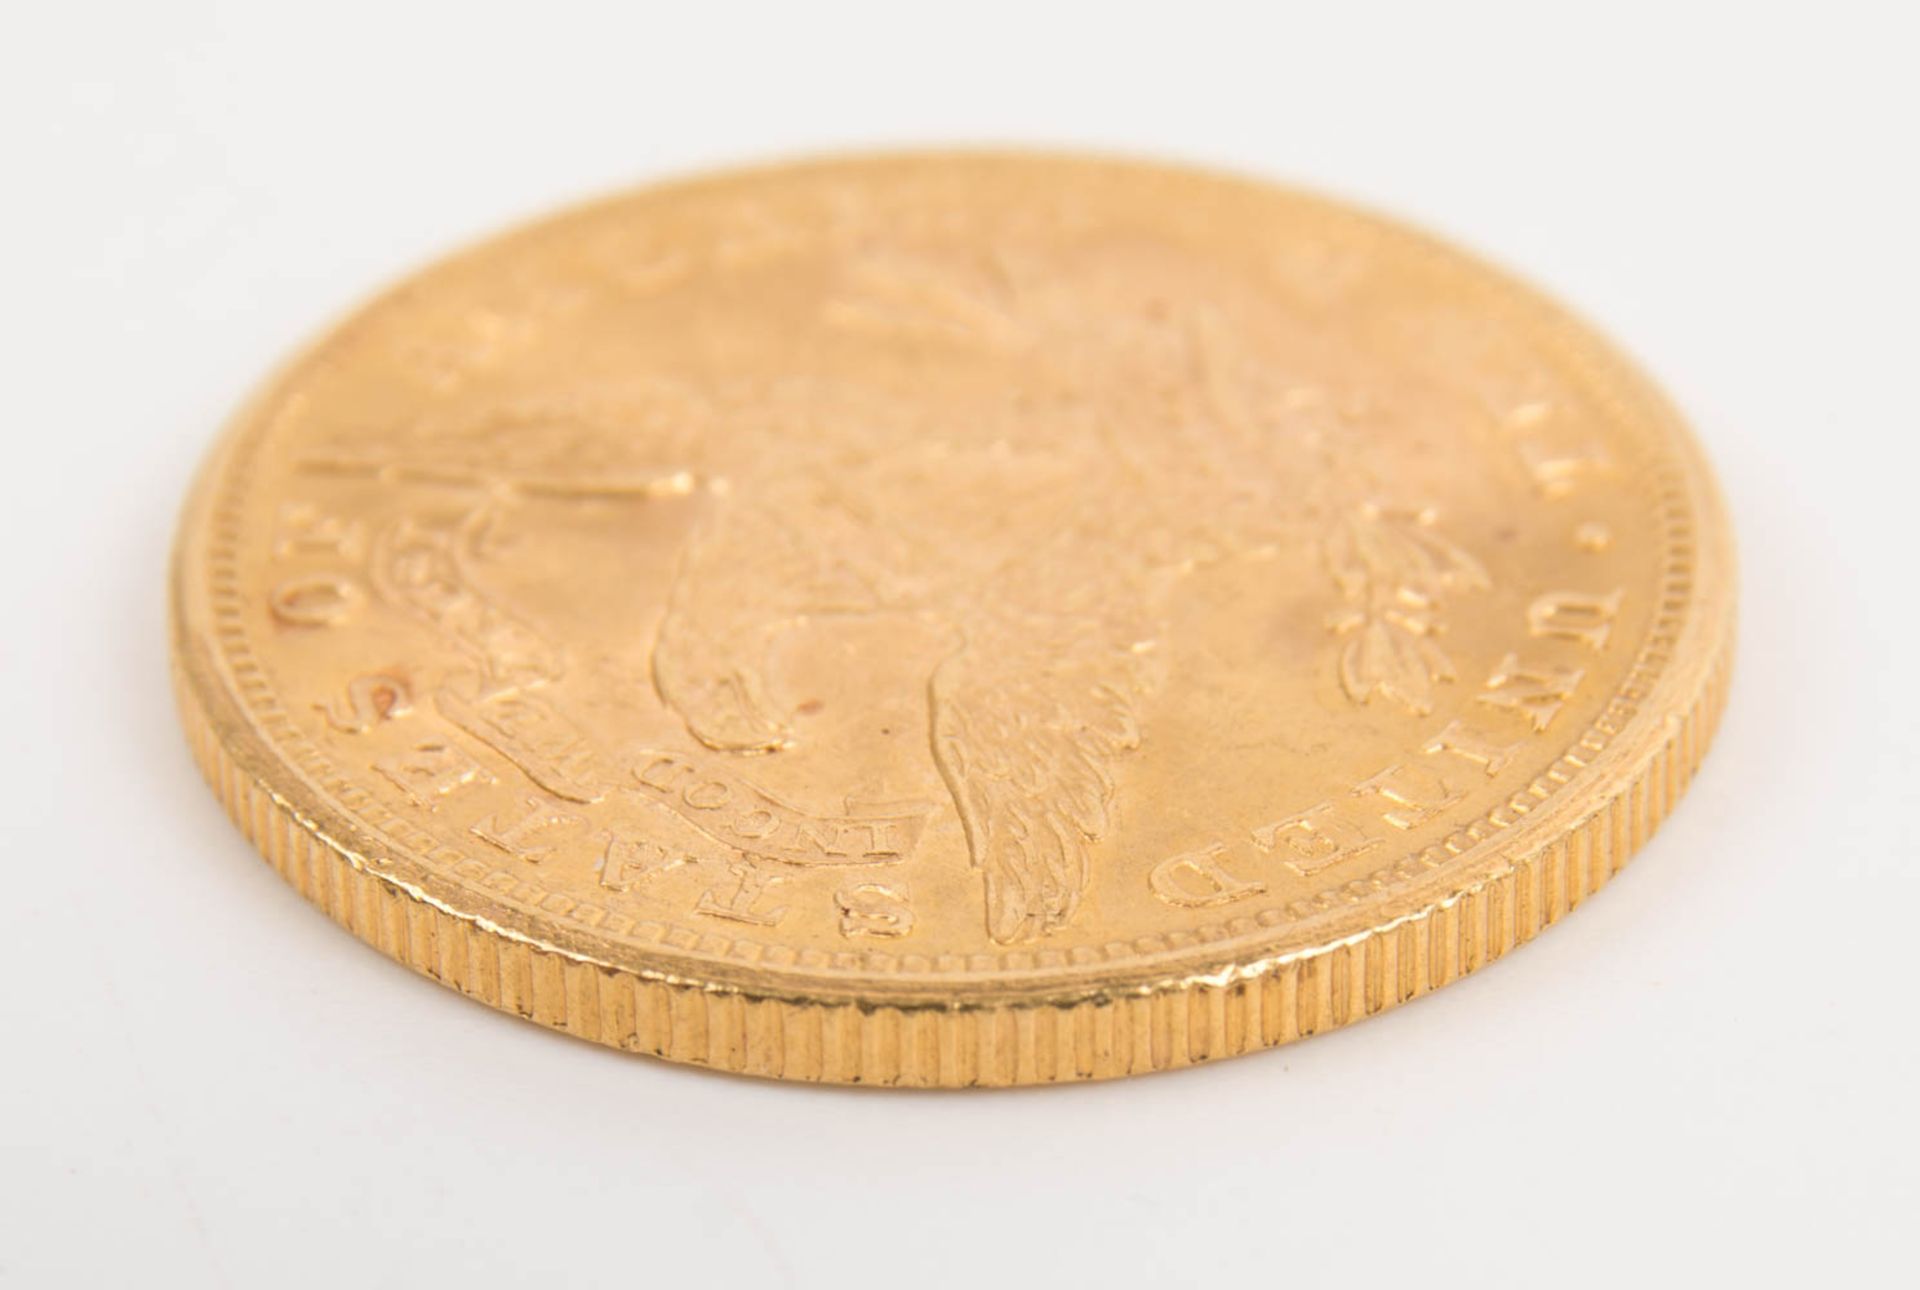 Gold Coin USA, 10 Dollars "Coronet Head" 1901 S. - Image 3 of 3